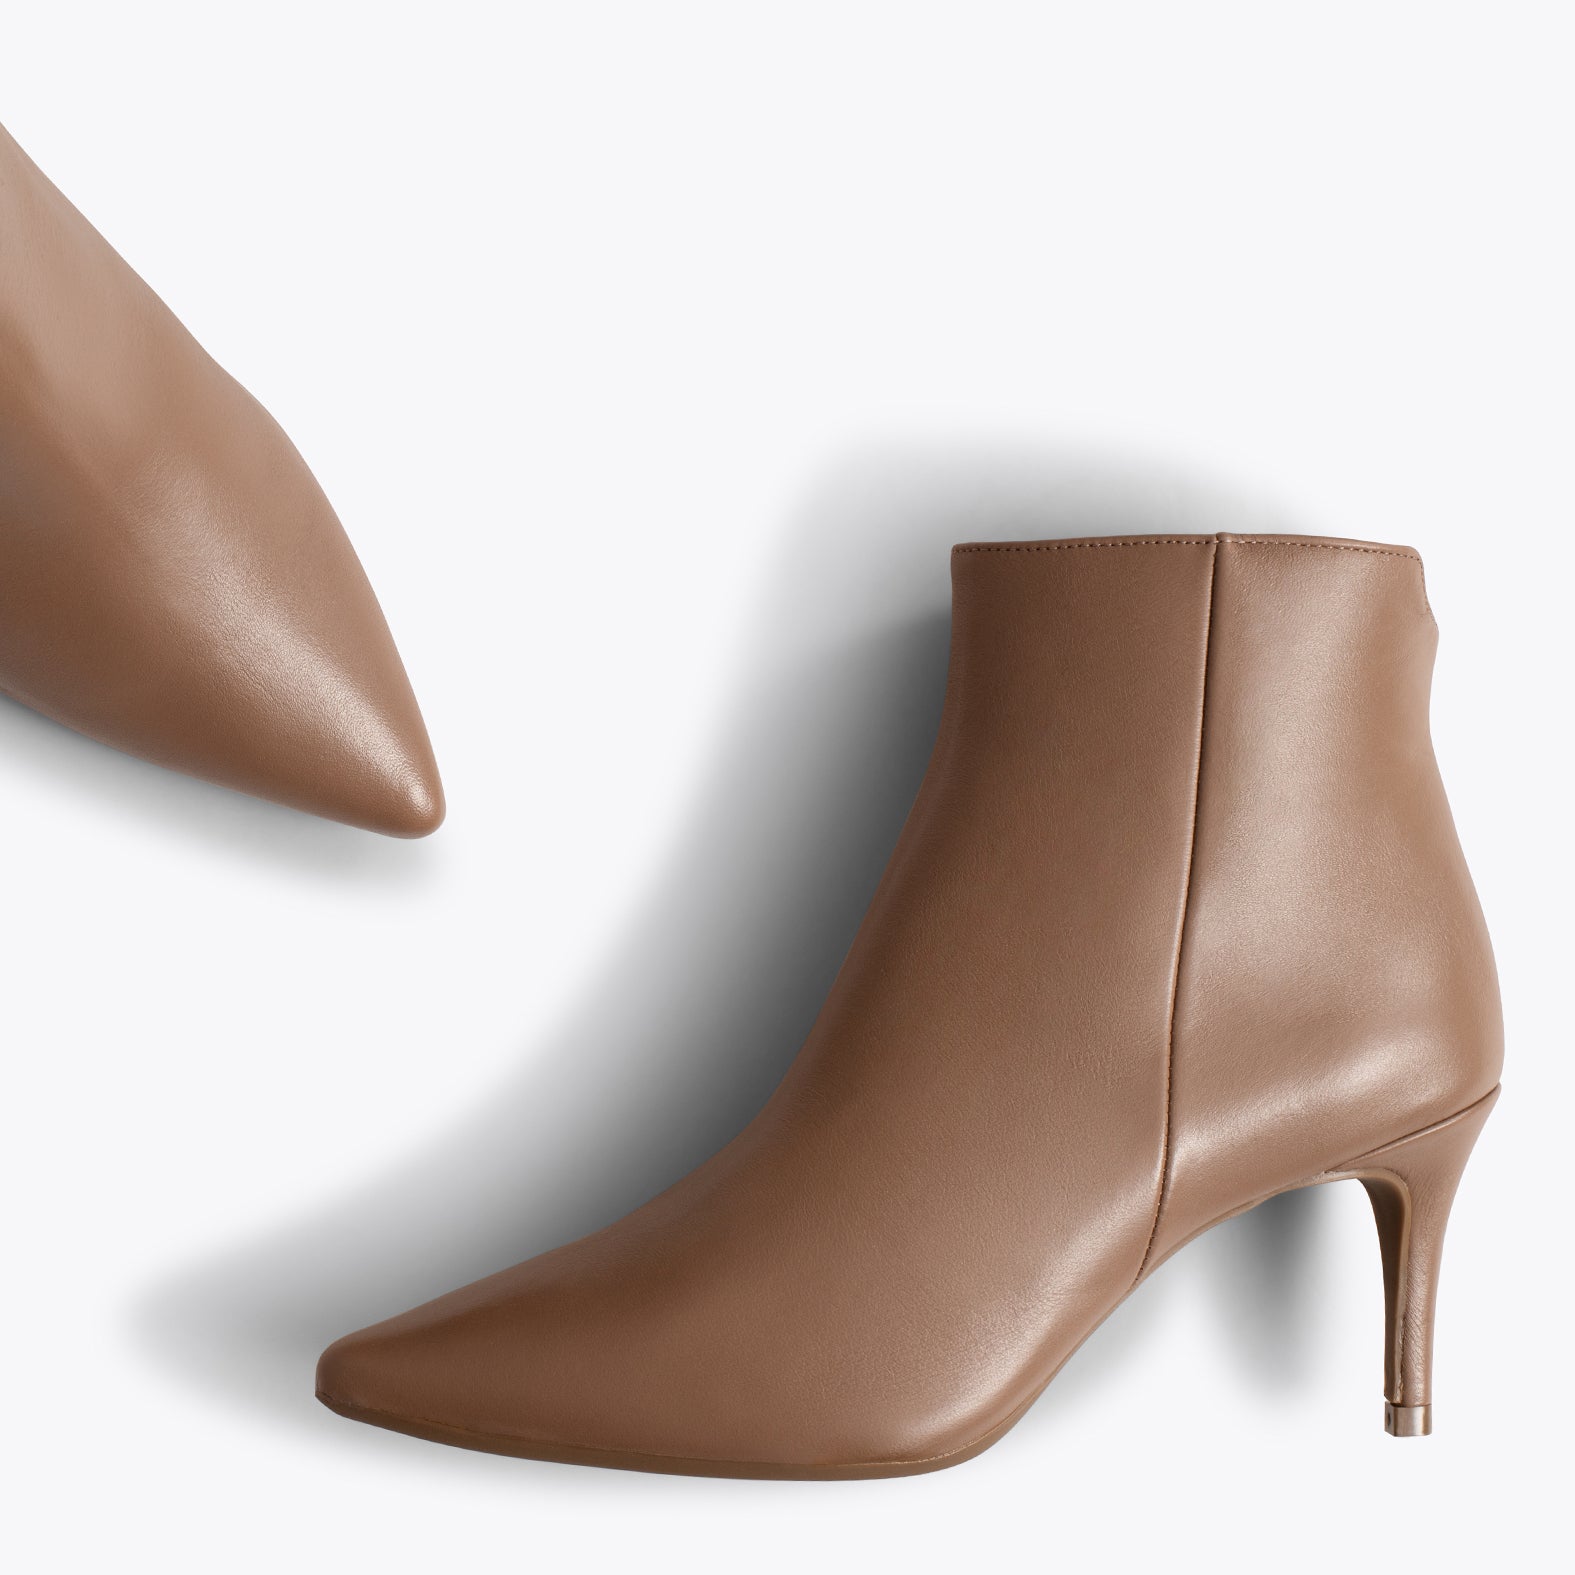 OUTFIT – MAKE UP suede high heel bootie